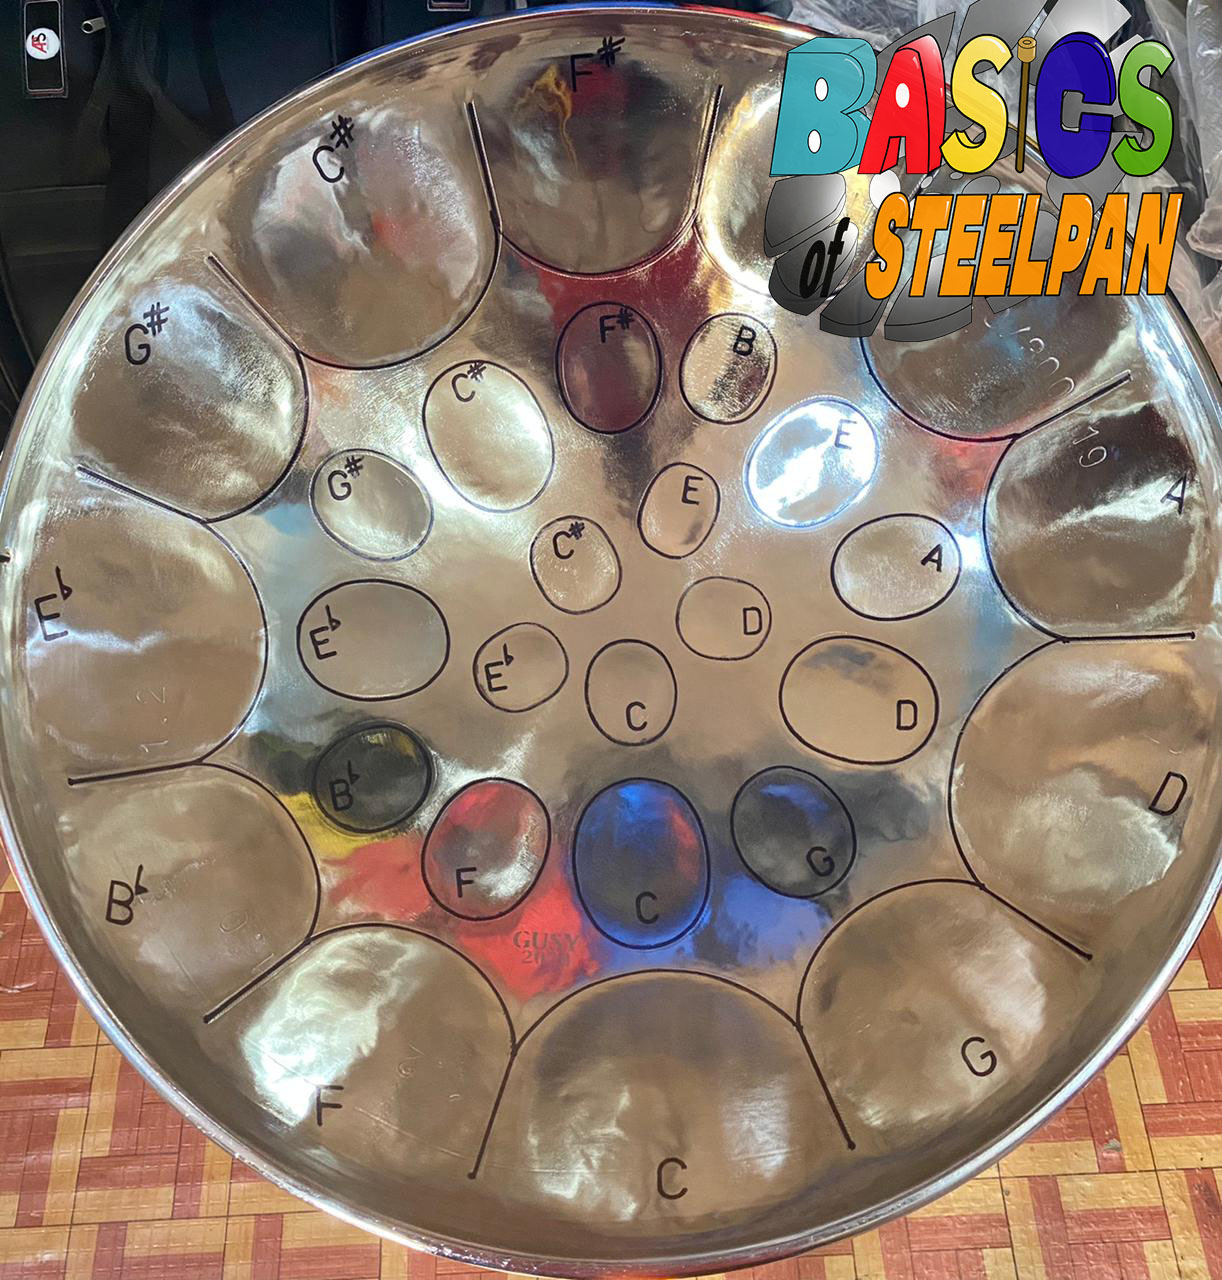 https://pan-mag.com/wp-content/uploads/2021/01/what-is-a-steelpan_bosp-logo-included-1.jpg